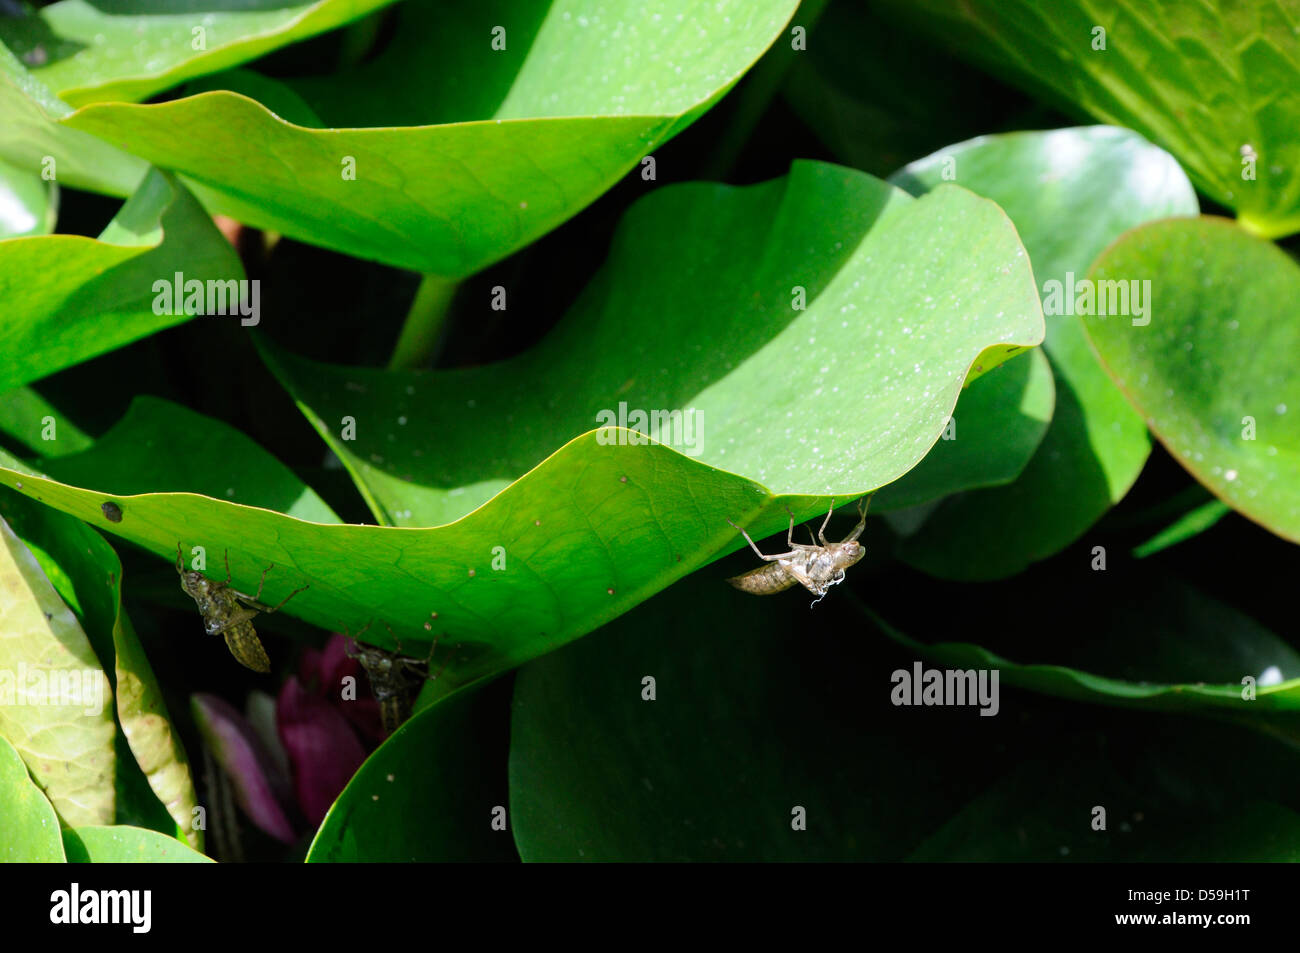 Dragonfly larvae emerging from a pond Stock Photo